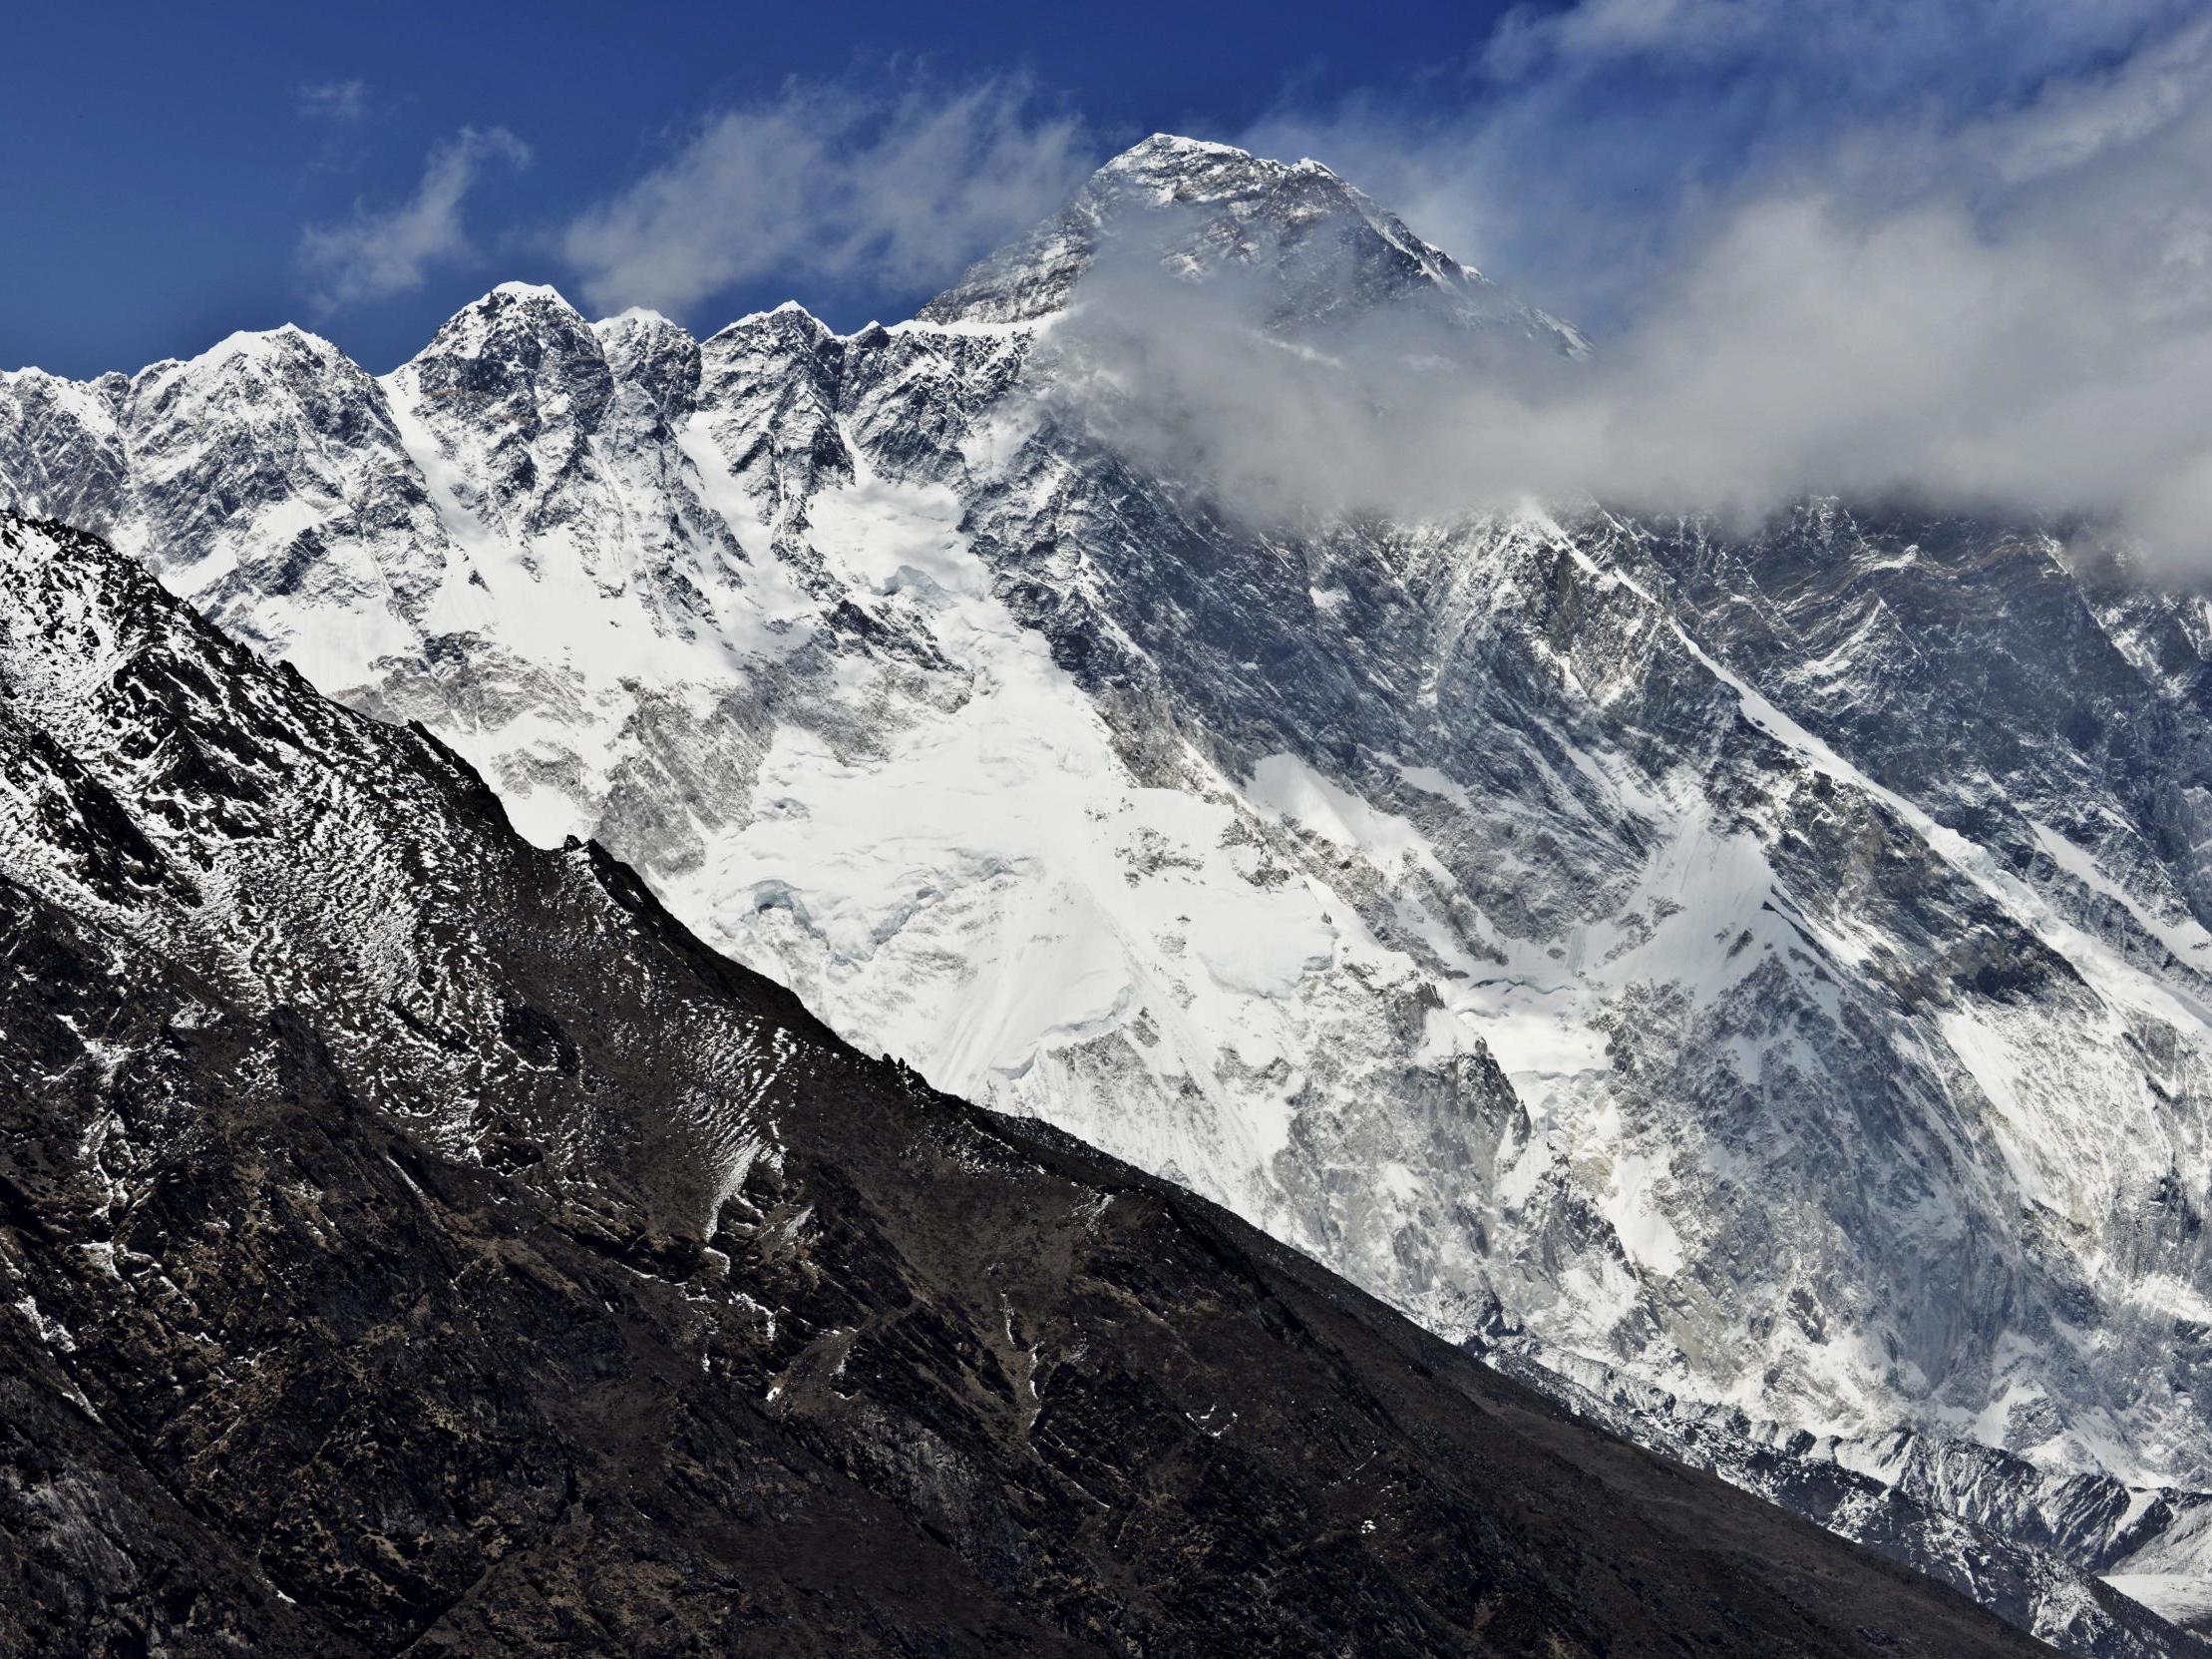 Two climbers are determined to forge a new route up the mountain, despite setbacks this year